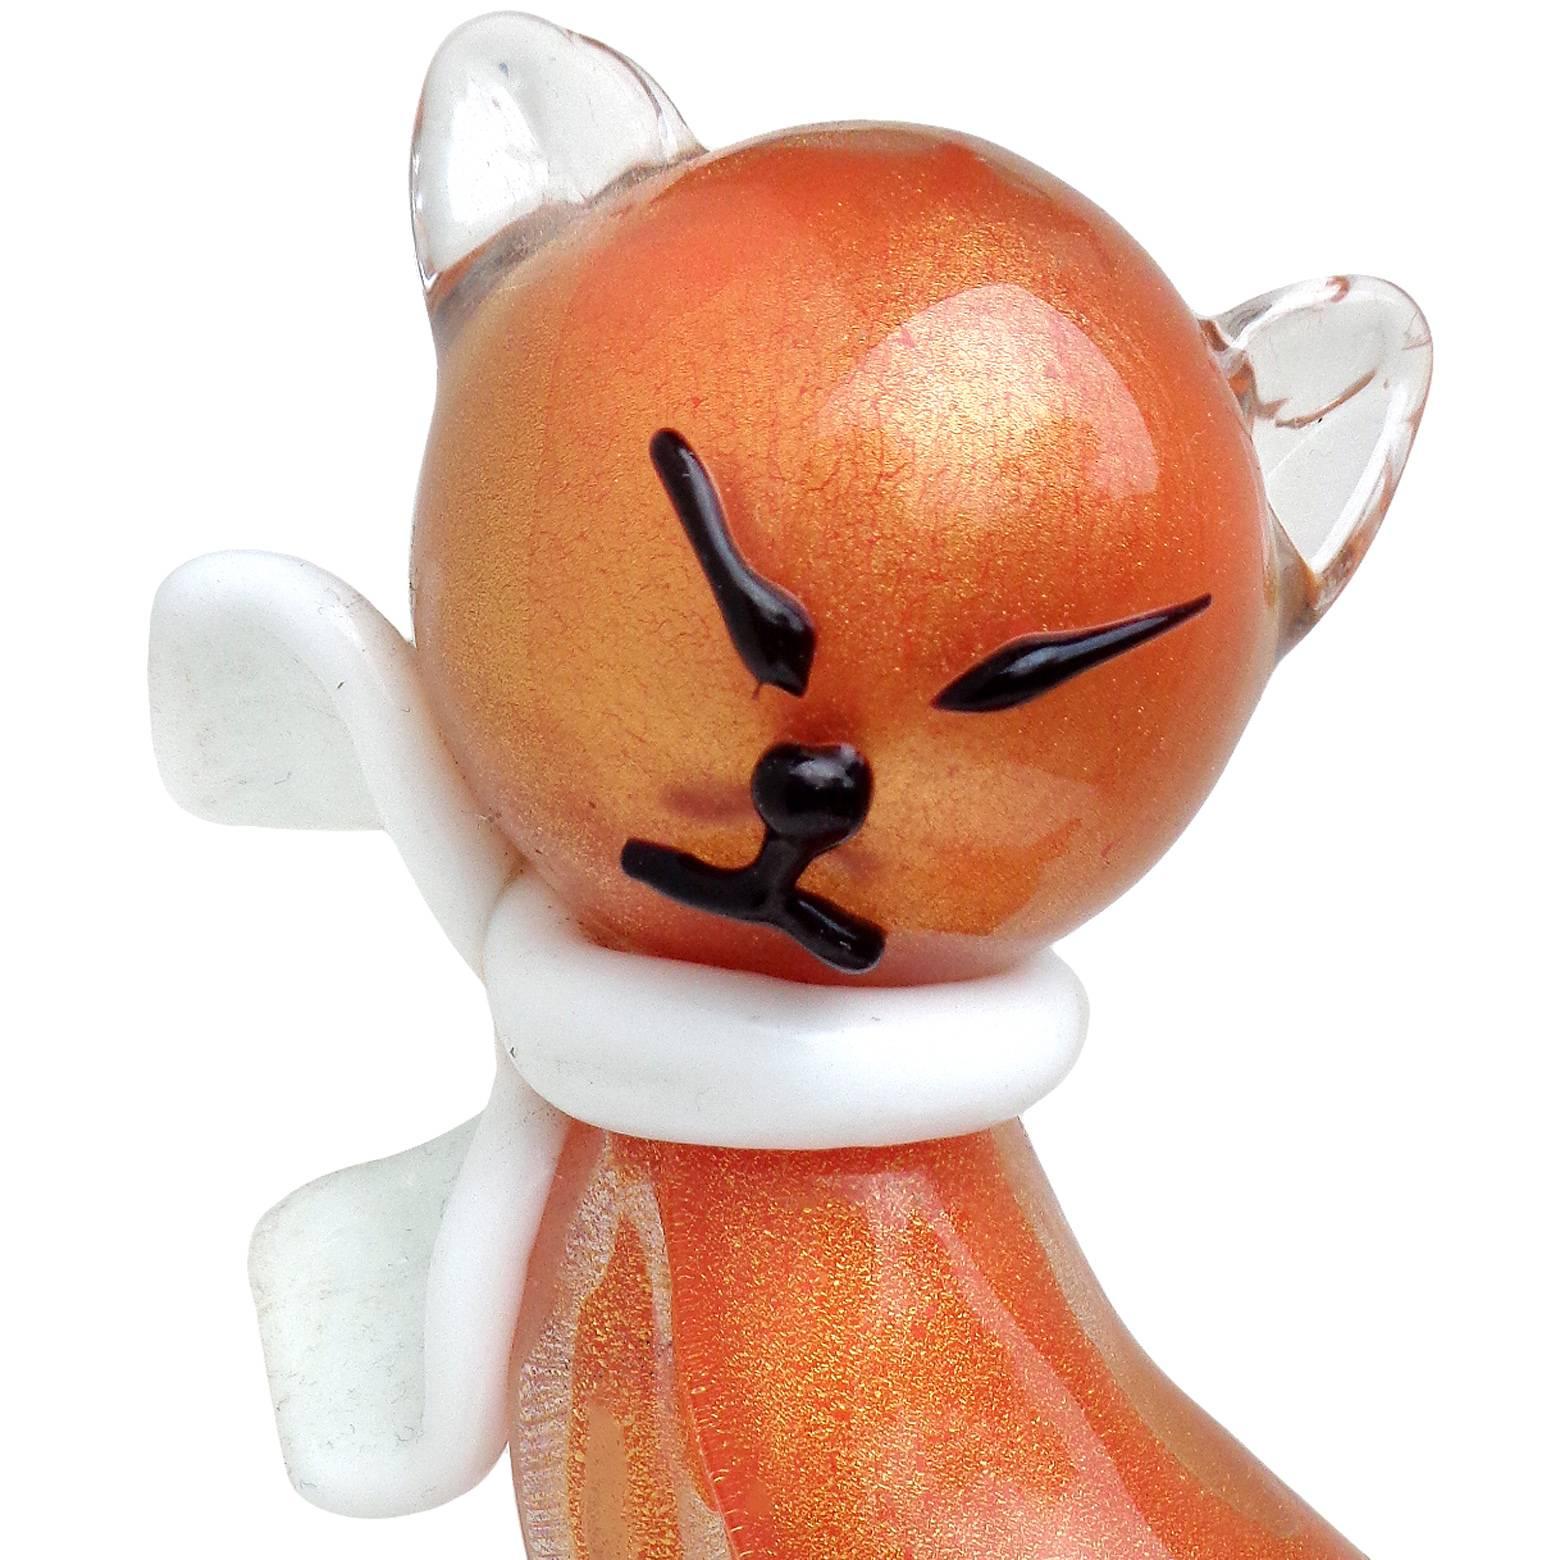 Gorgeous Murano hand blown orange and gold flecks Italian art glass cat figurine or sculpture with white bow. Documented to designer Alfredo Barbini, circa 1950s. It is published in his catalog. The kitten has a very elegant shape, with black